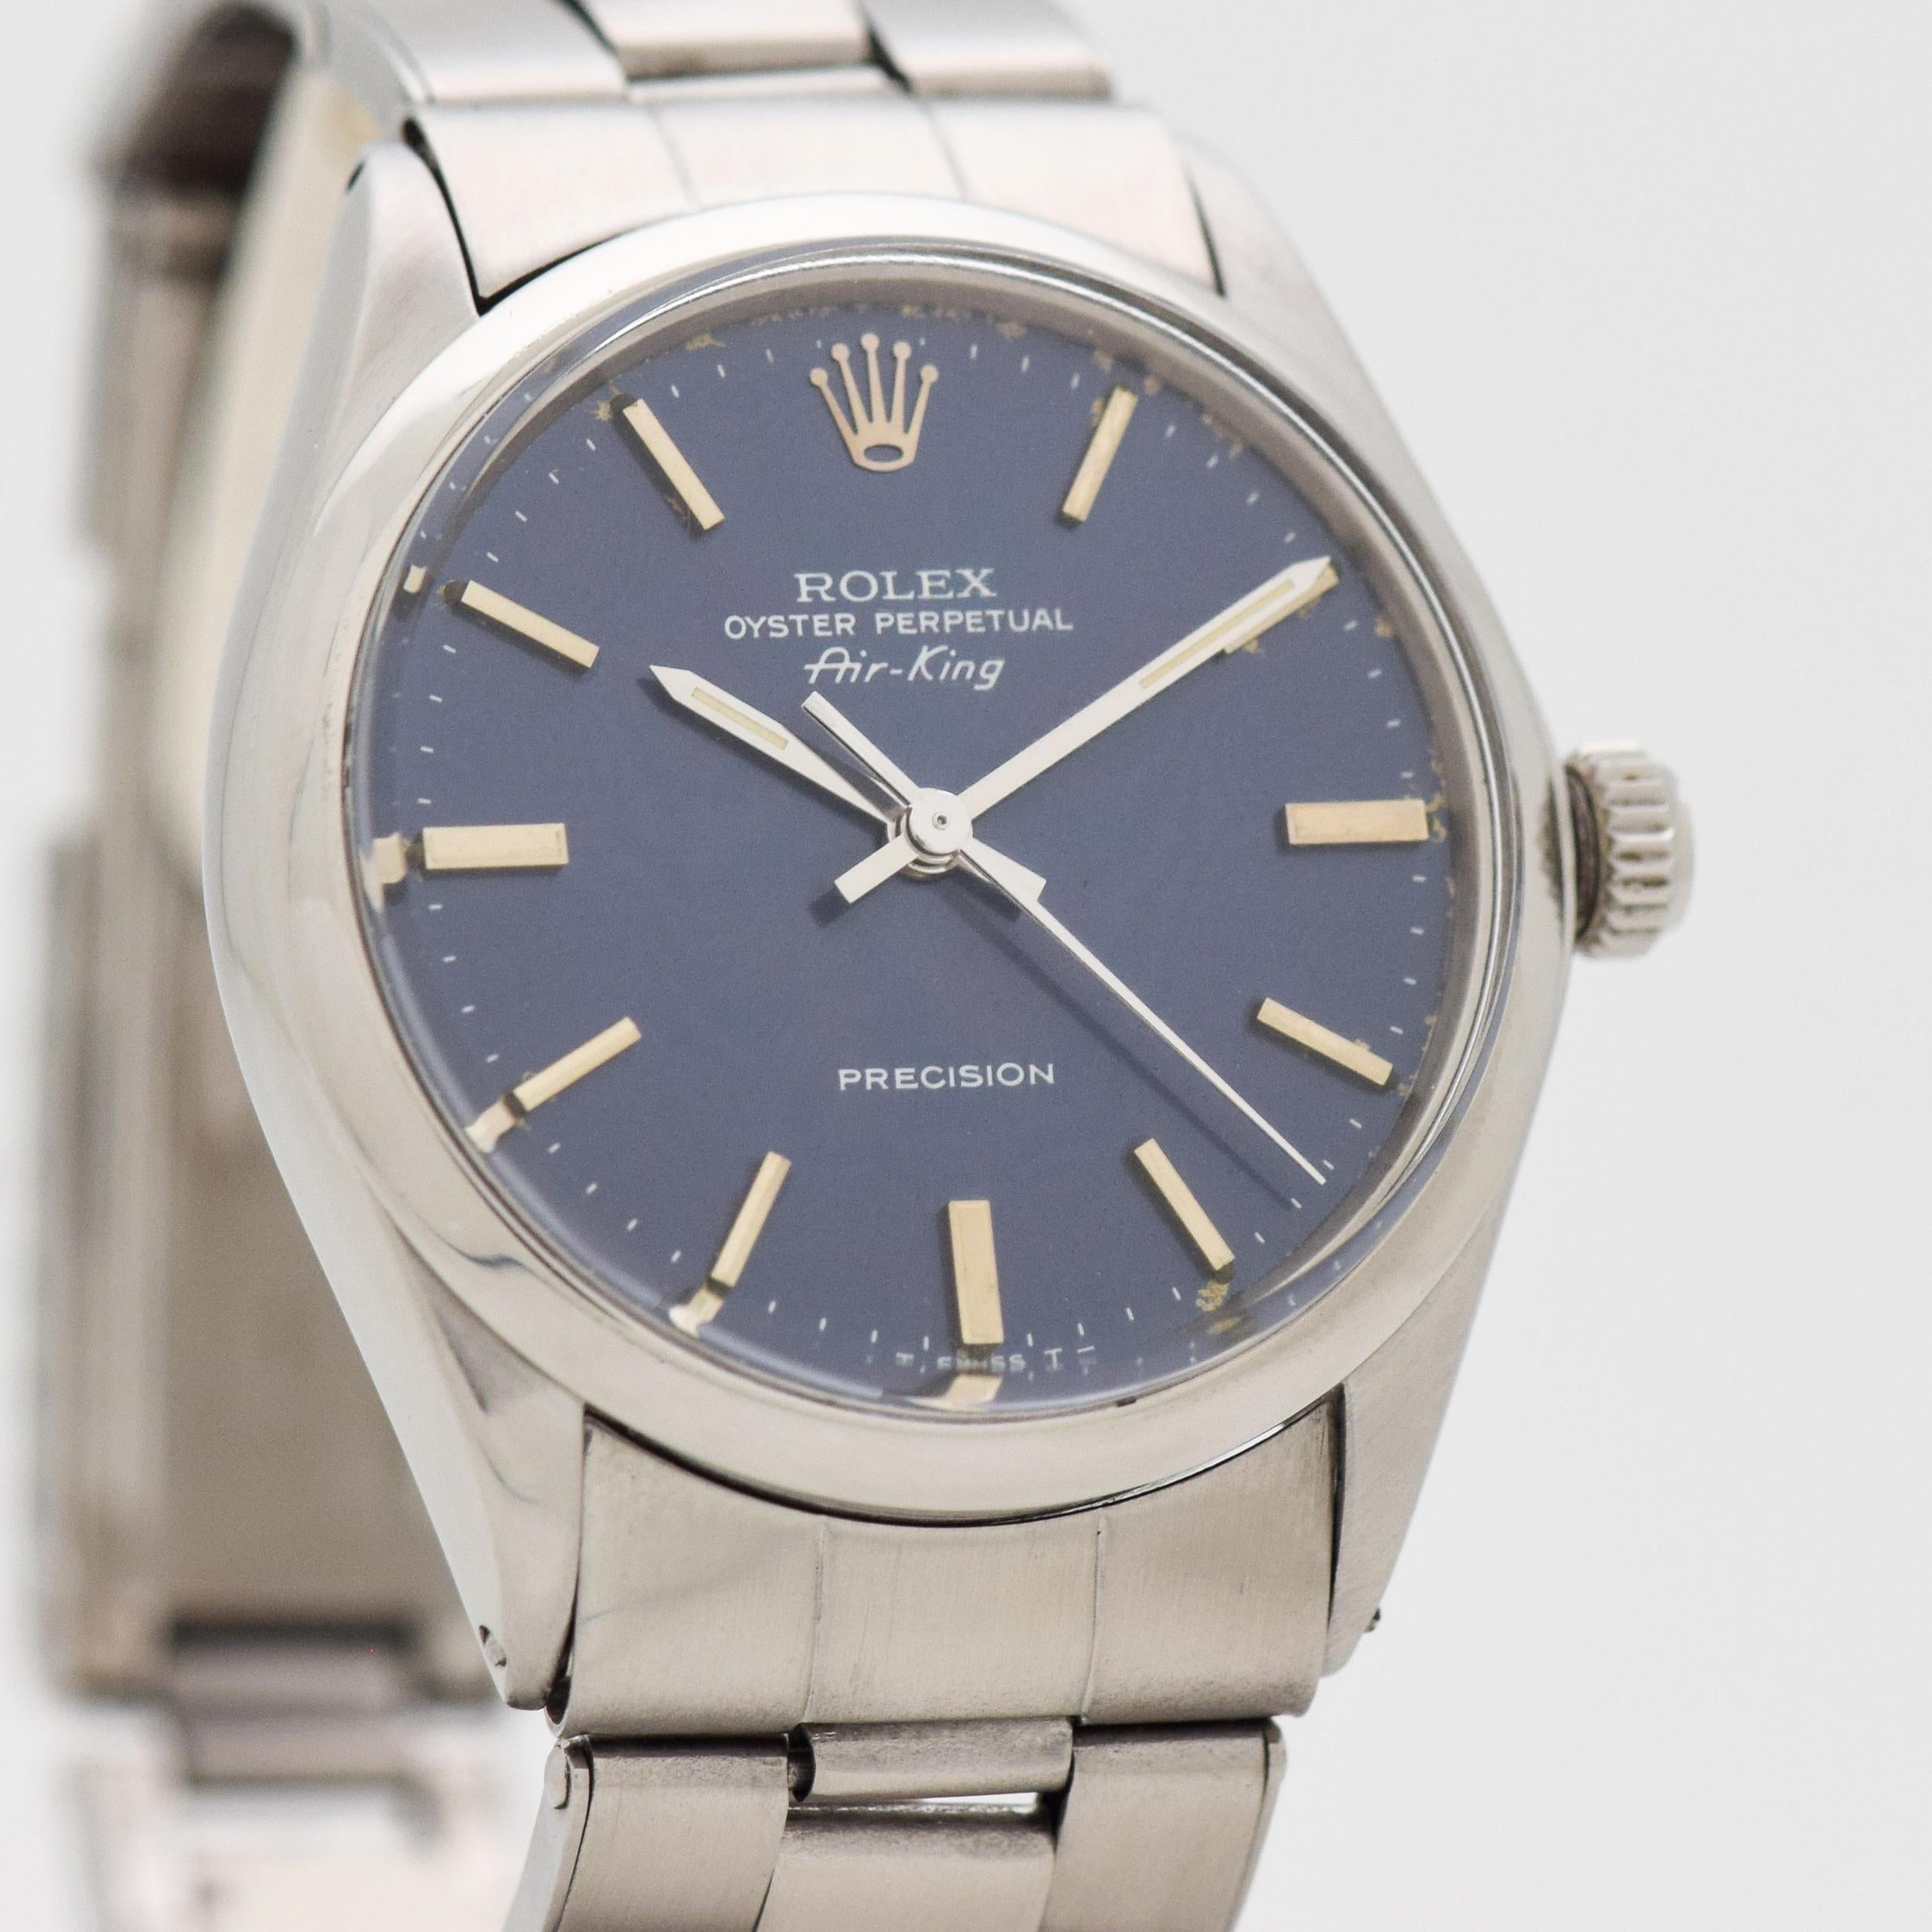 1967 Vintage Rolex Air-King Reference 5500. Stainless Steel case, that measures in at 34mm wide. Original, patinated blue dial with applied, steel bar markers. Powered by a 26-jewel, automatic caliber movement. Equipped with an original, Rolex